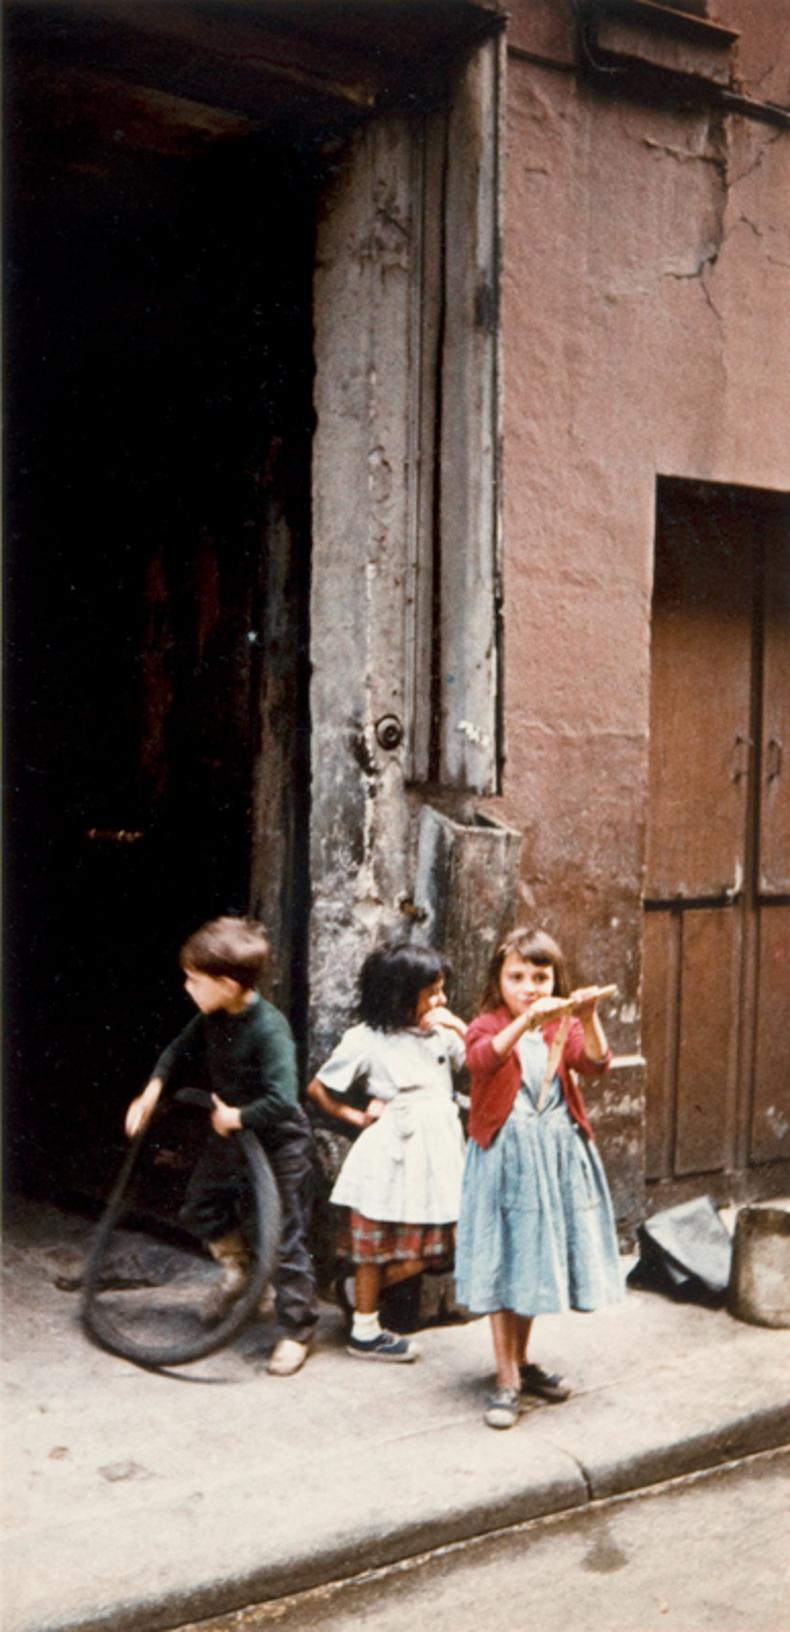 Children Playing In Paris from the Paris In Colour Series 1956-61
By Peter Cornelius

12 x 16 inches / 31 x 41 cm paper size
Printed 2022
Archival pigment print 

Framing and size options available - Please enquire




About:

Peter Cornelius